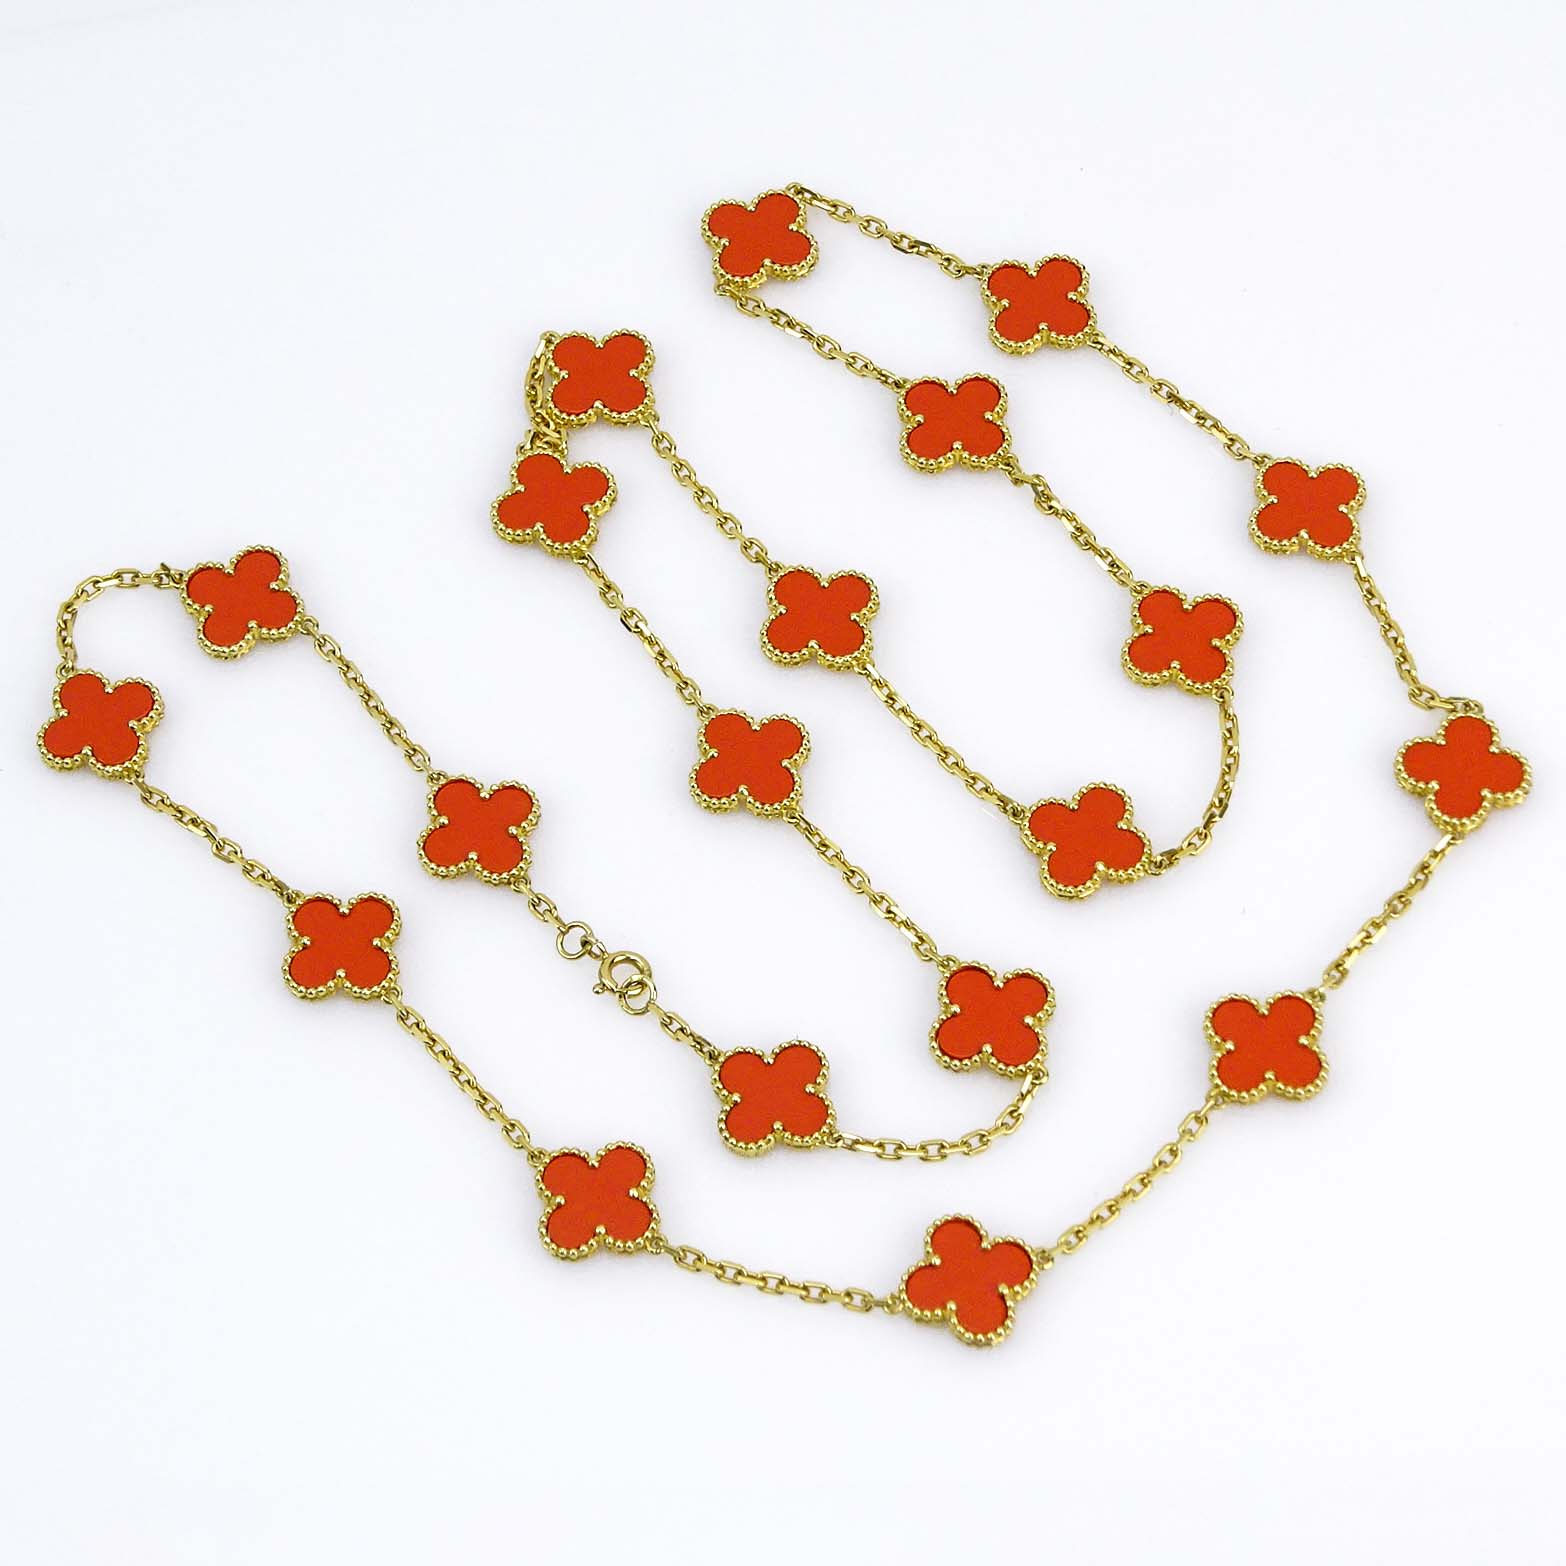 Van Cleef & Arpels 18 Karat Yellow Gold and Red Coral Alhambra Necklace with faux suede VCA case.